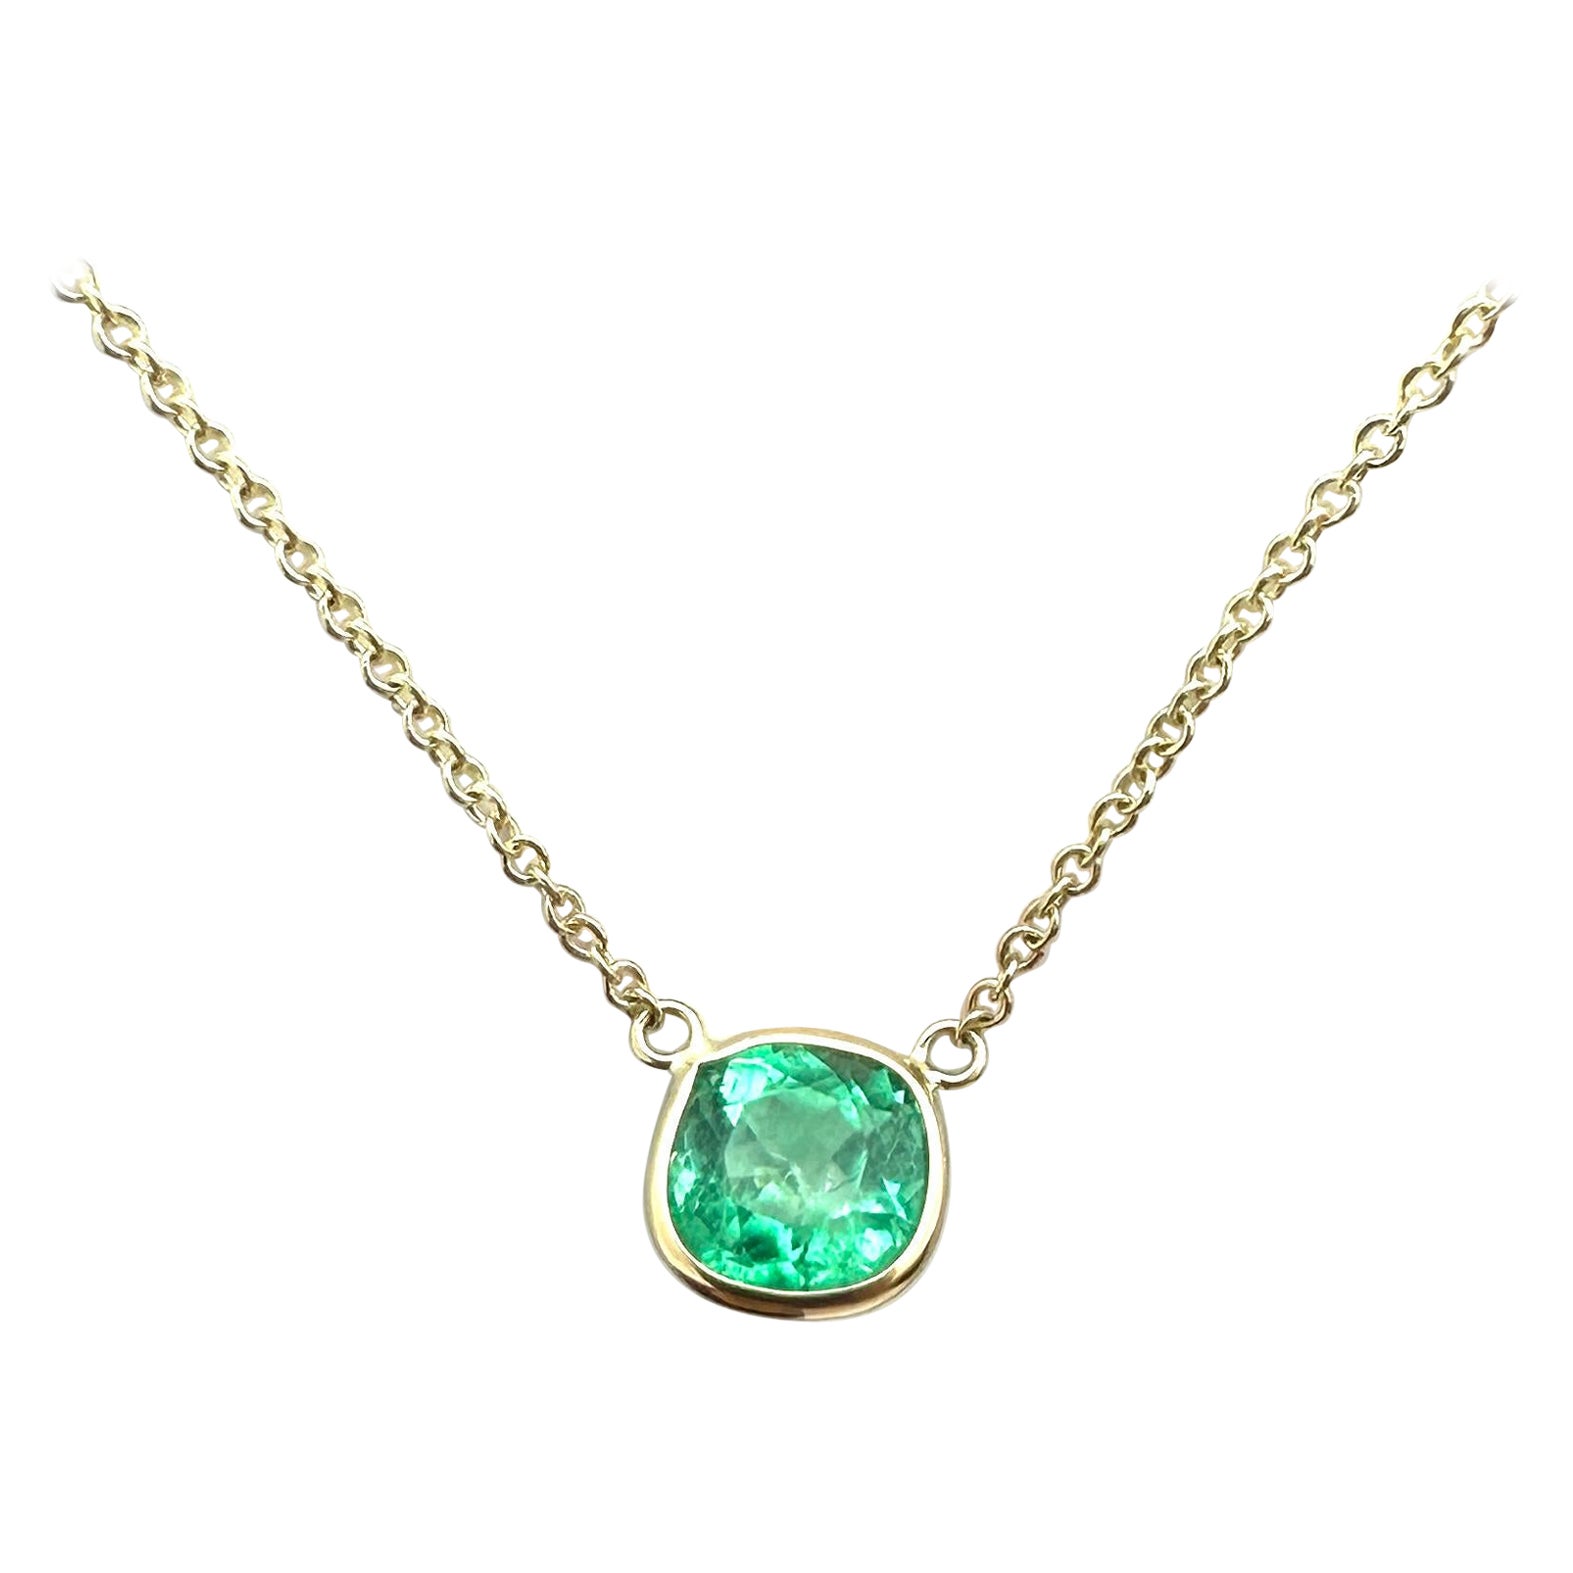 1.51 Carat Weight Green Emerald Cushion Cut Solitaire Necklace in 14k YG For Sale